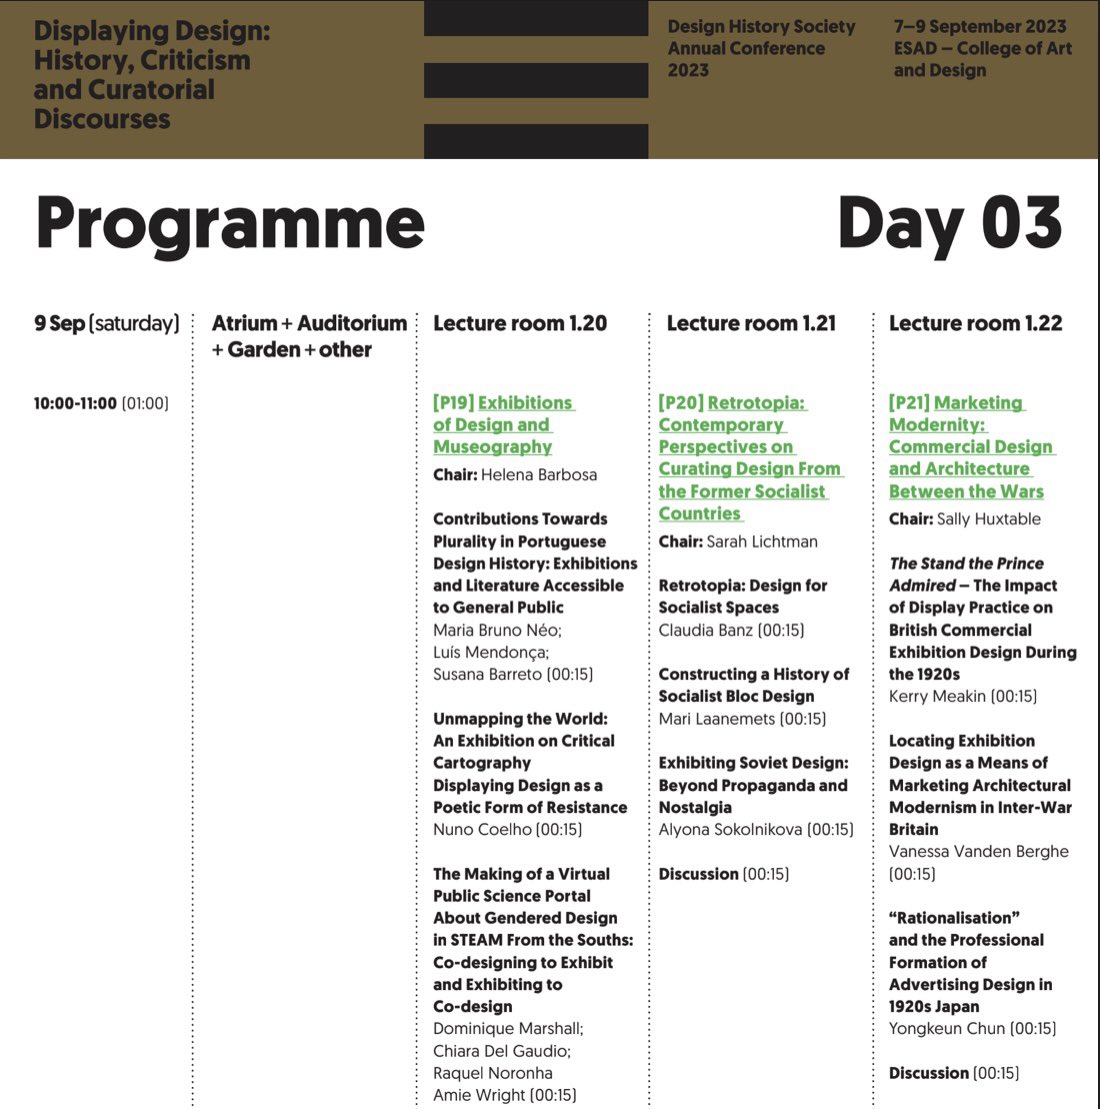 Excited to be one of the speakers on Day 3 of the Design History Society’s Annual Conference September 7-9 in Porto. #tudublin #tudublin_artanddesign #designhistory #display